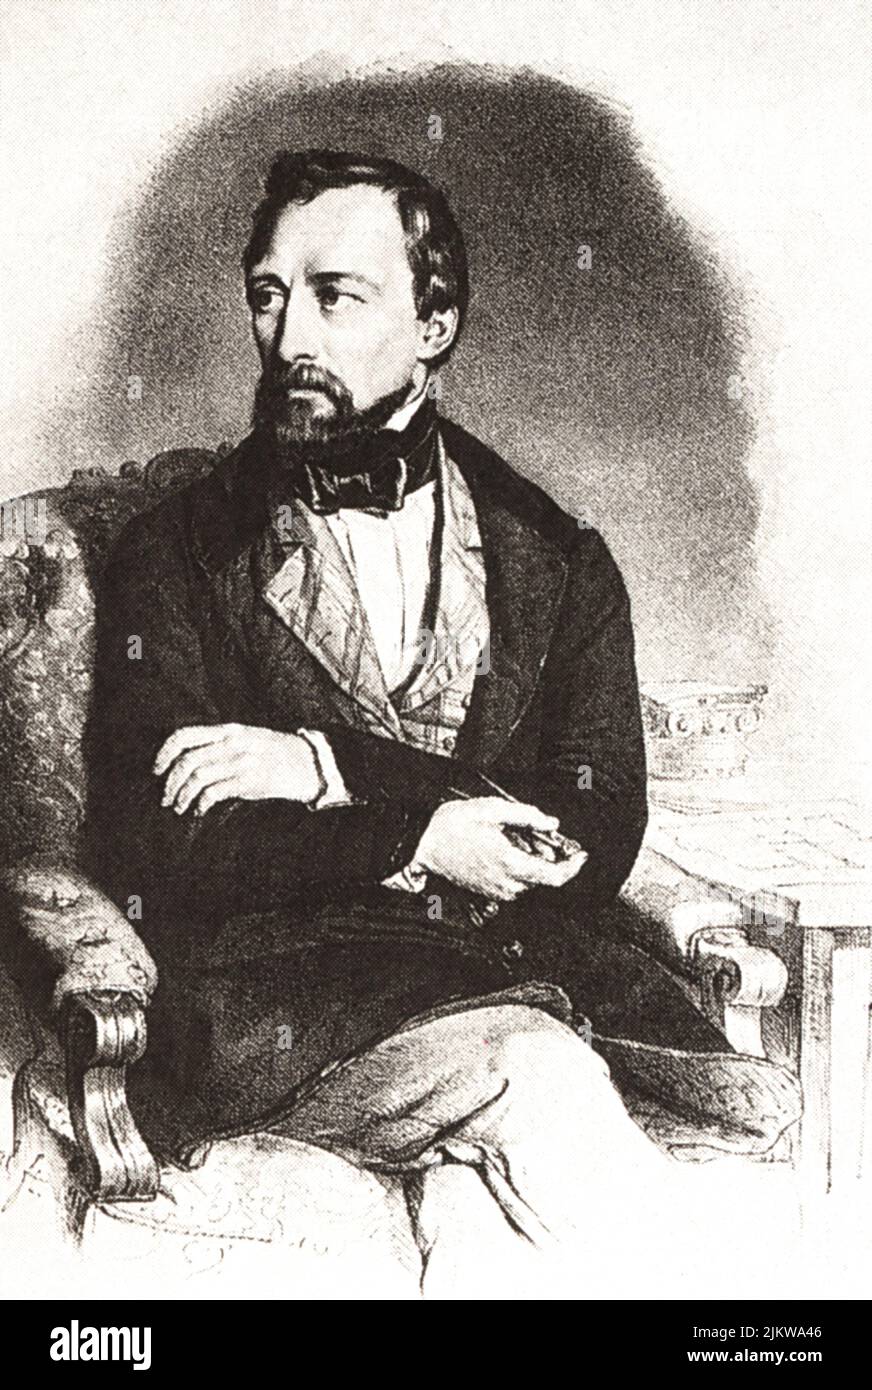 1865 ca., GERMANY  : Portrait of  GOTTFRIED SEMPER ( 1803 - 1879 ) , the preferred architect  from the king of Bayern LUDWIG II of Wittelsbach ( 1845 - 1886 ). In june 1867 shown a project for the new  Opera House in  Munich , on the bank of river Isar, but this inspired theatre building was never realized    - RE - REALI - ROYALTY - nobili - nobiltà - BAVIERA - music - classical - musica classica - portrait - ritratto  -  ARCHITETTO - ARCHITETTURA    ----  Archivio GBB Stock Photo